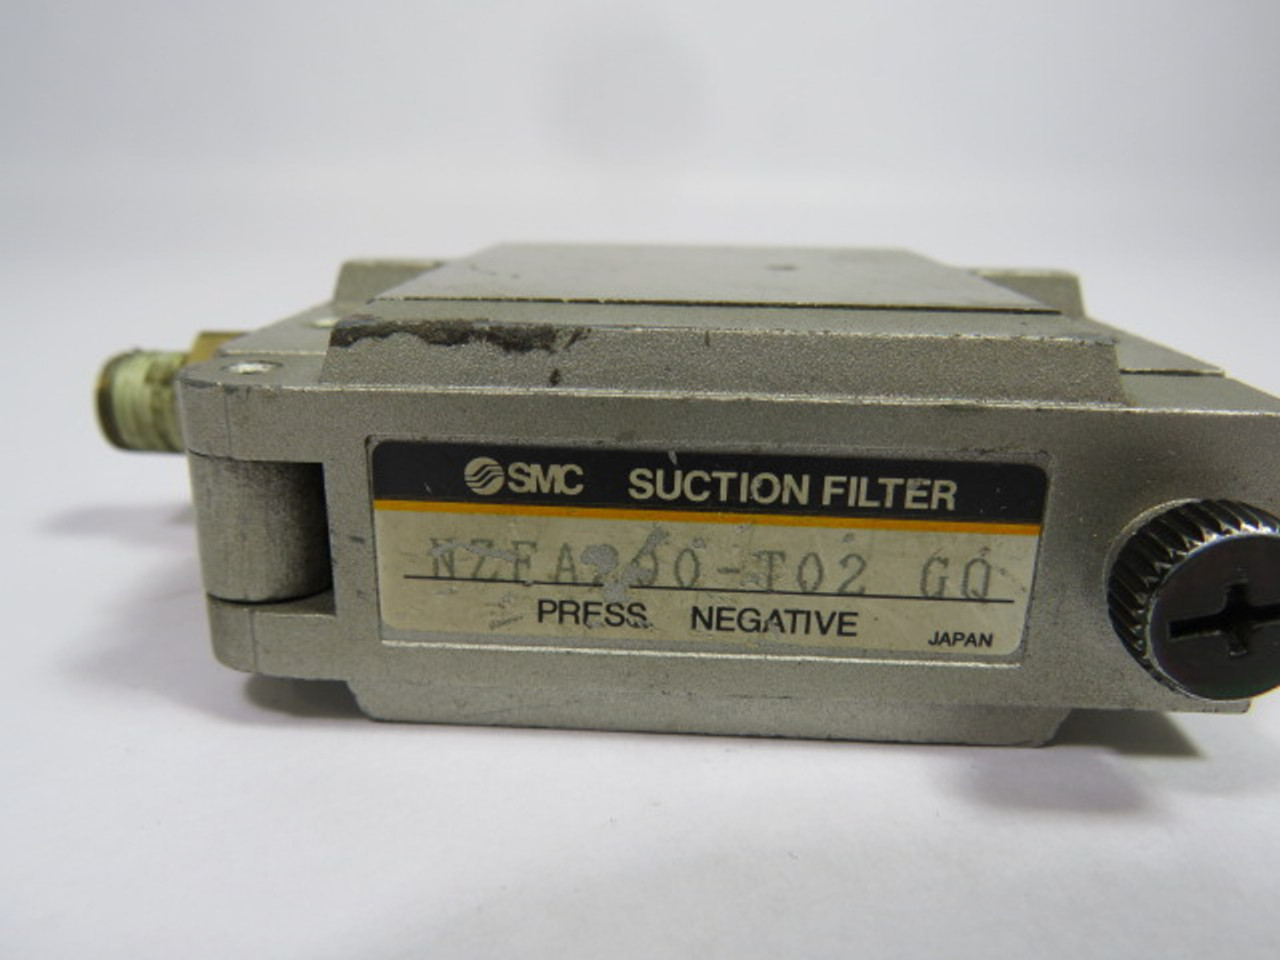 SMC NZFA200-T02 Air Suction Filter 1/4" NPT USED